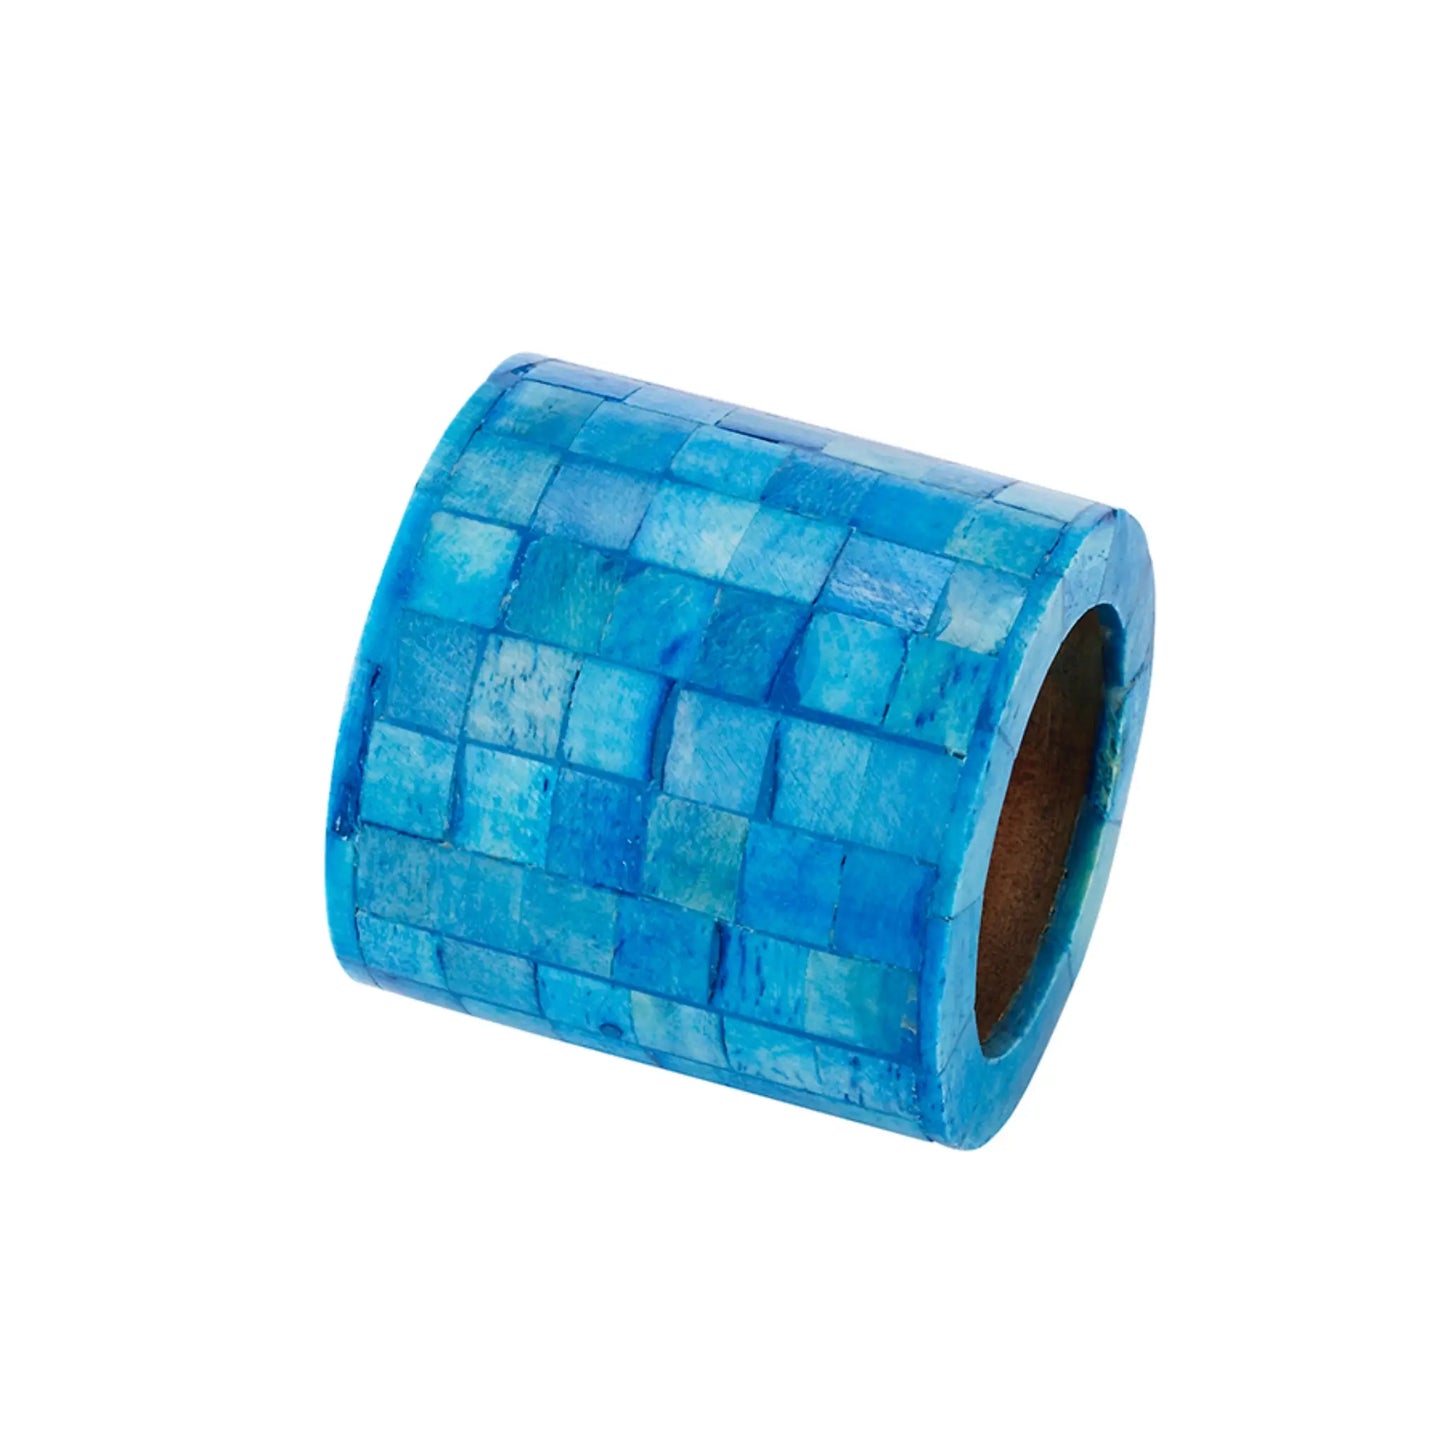 Congo Napkin Ring in Turquoise